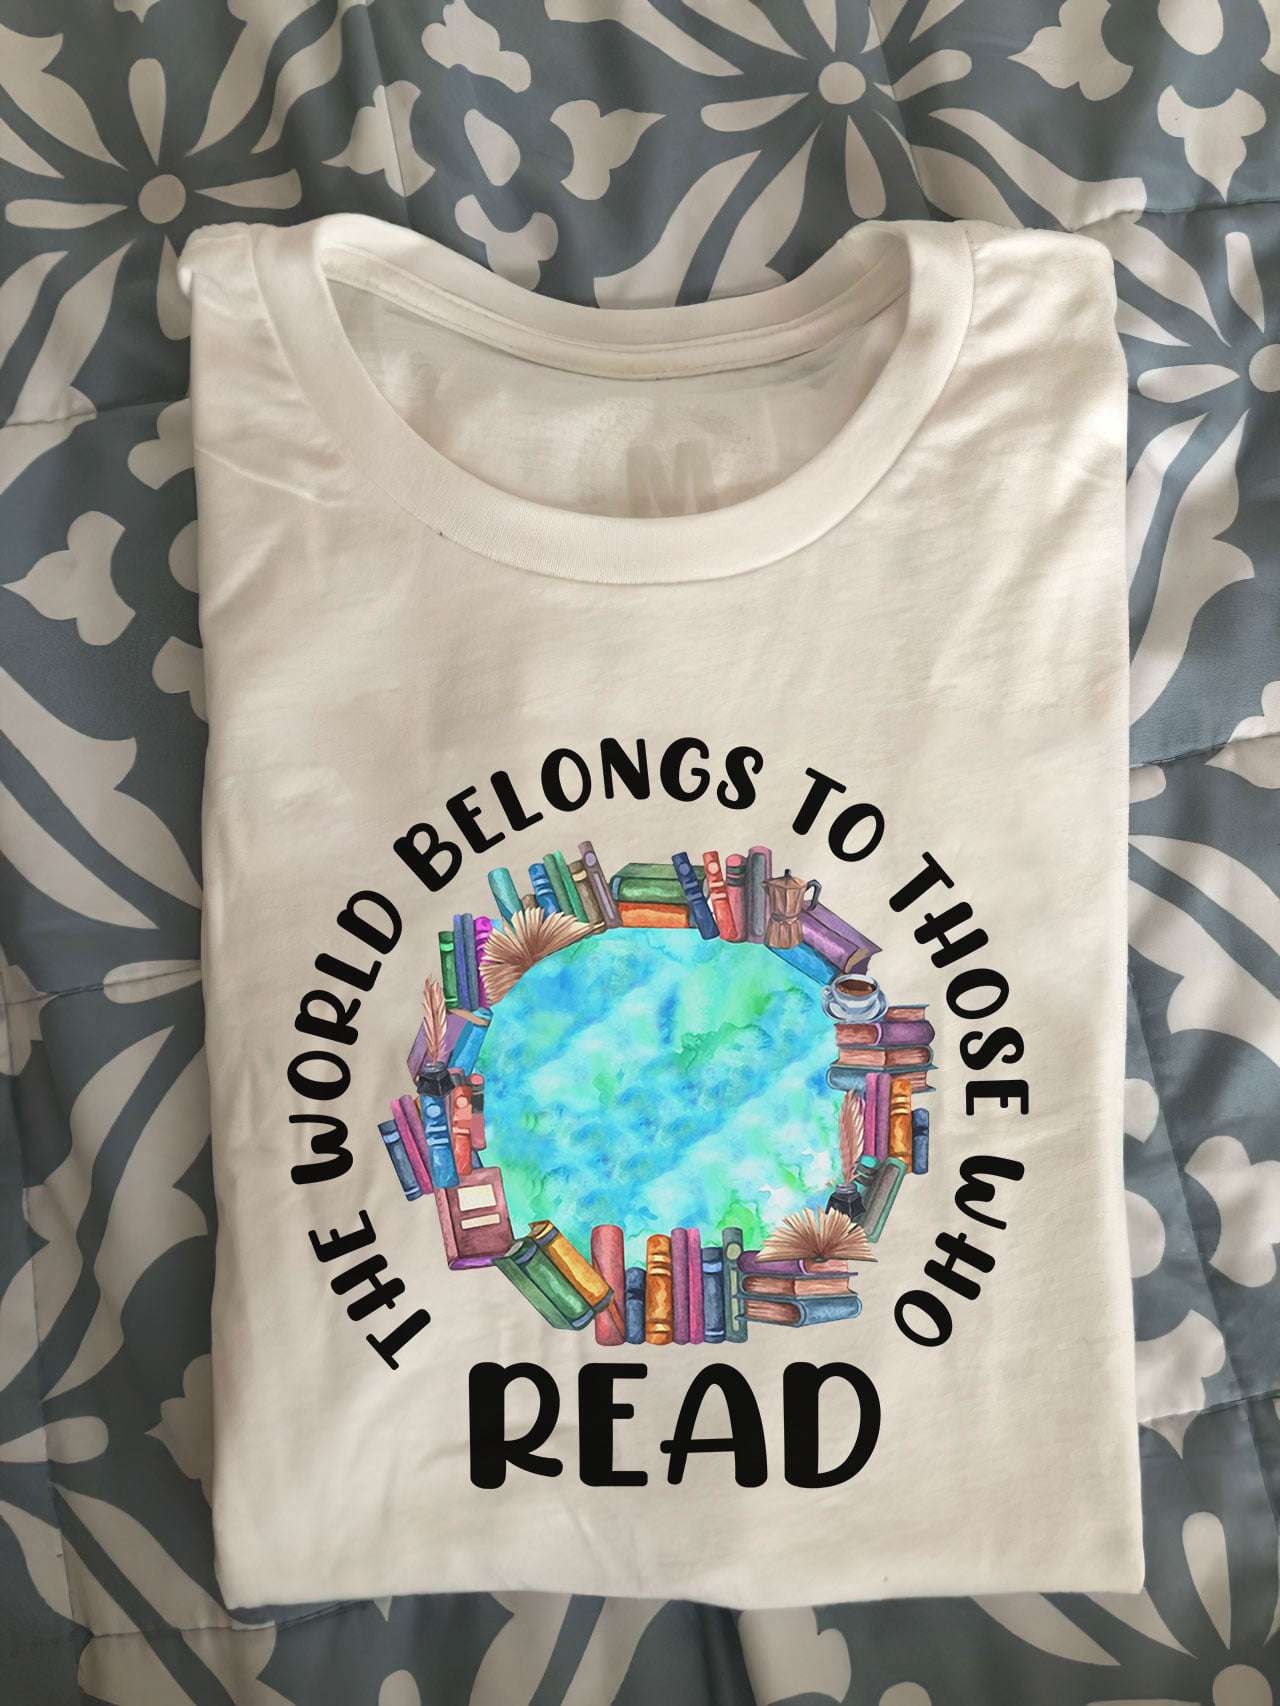 The world belongs to those who read - Love reading books, gift for bookaholic